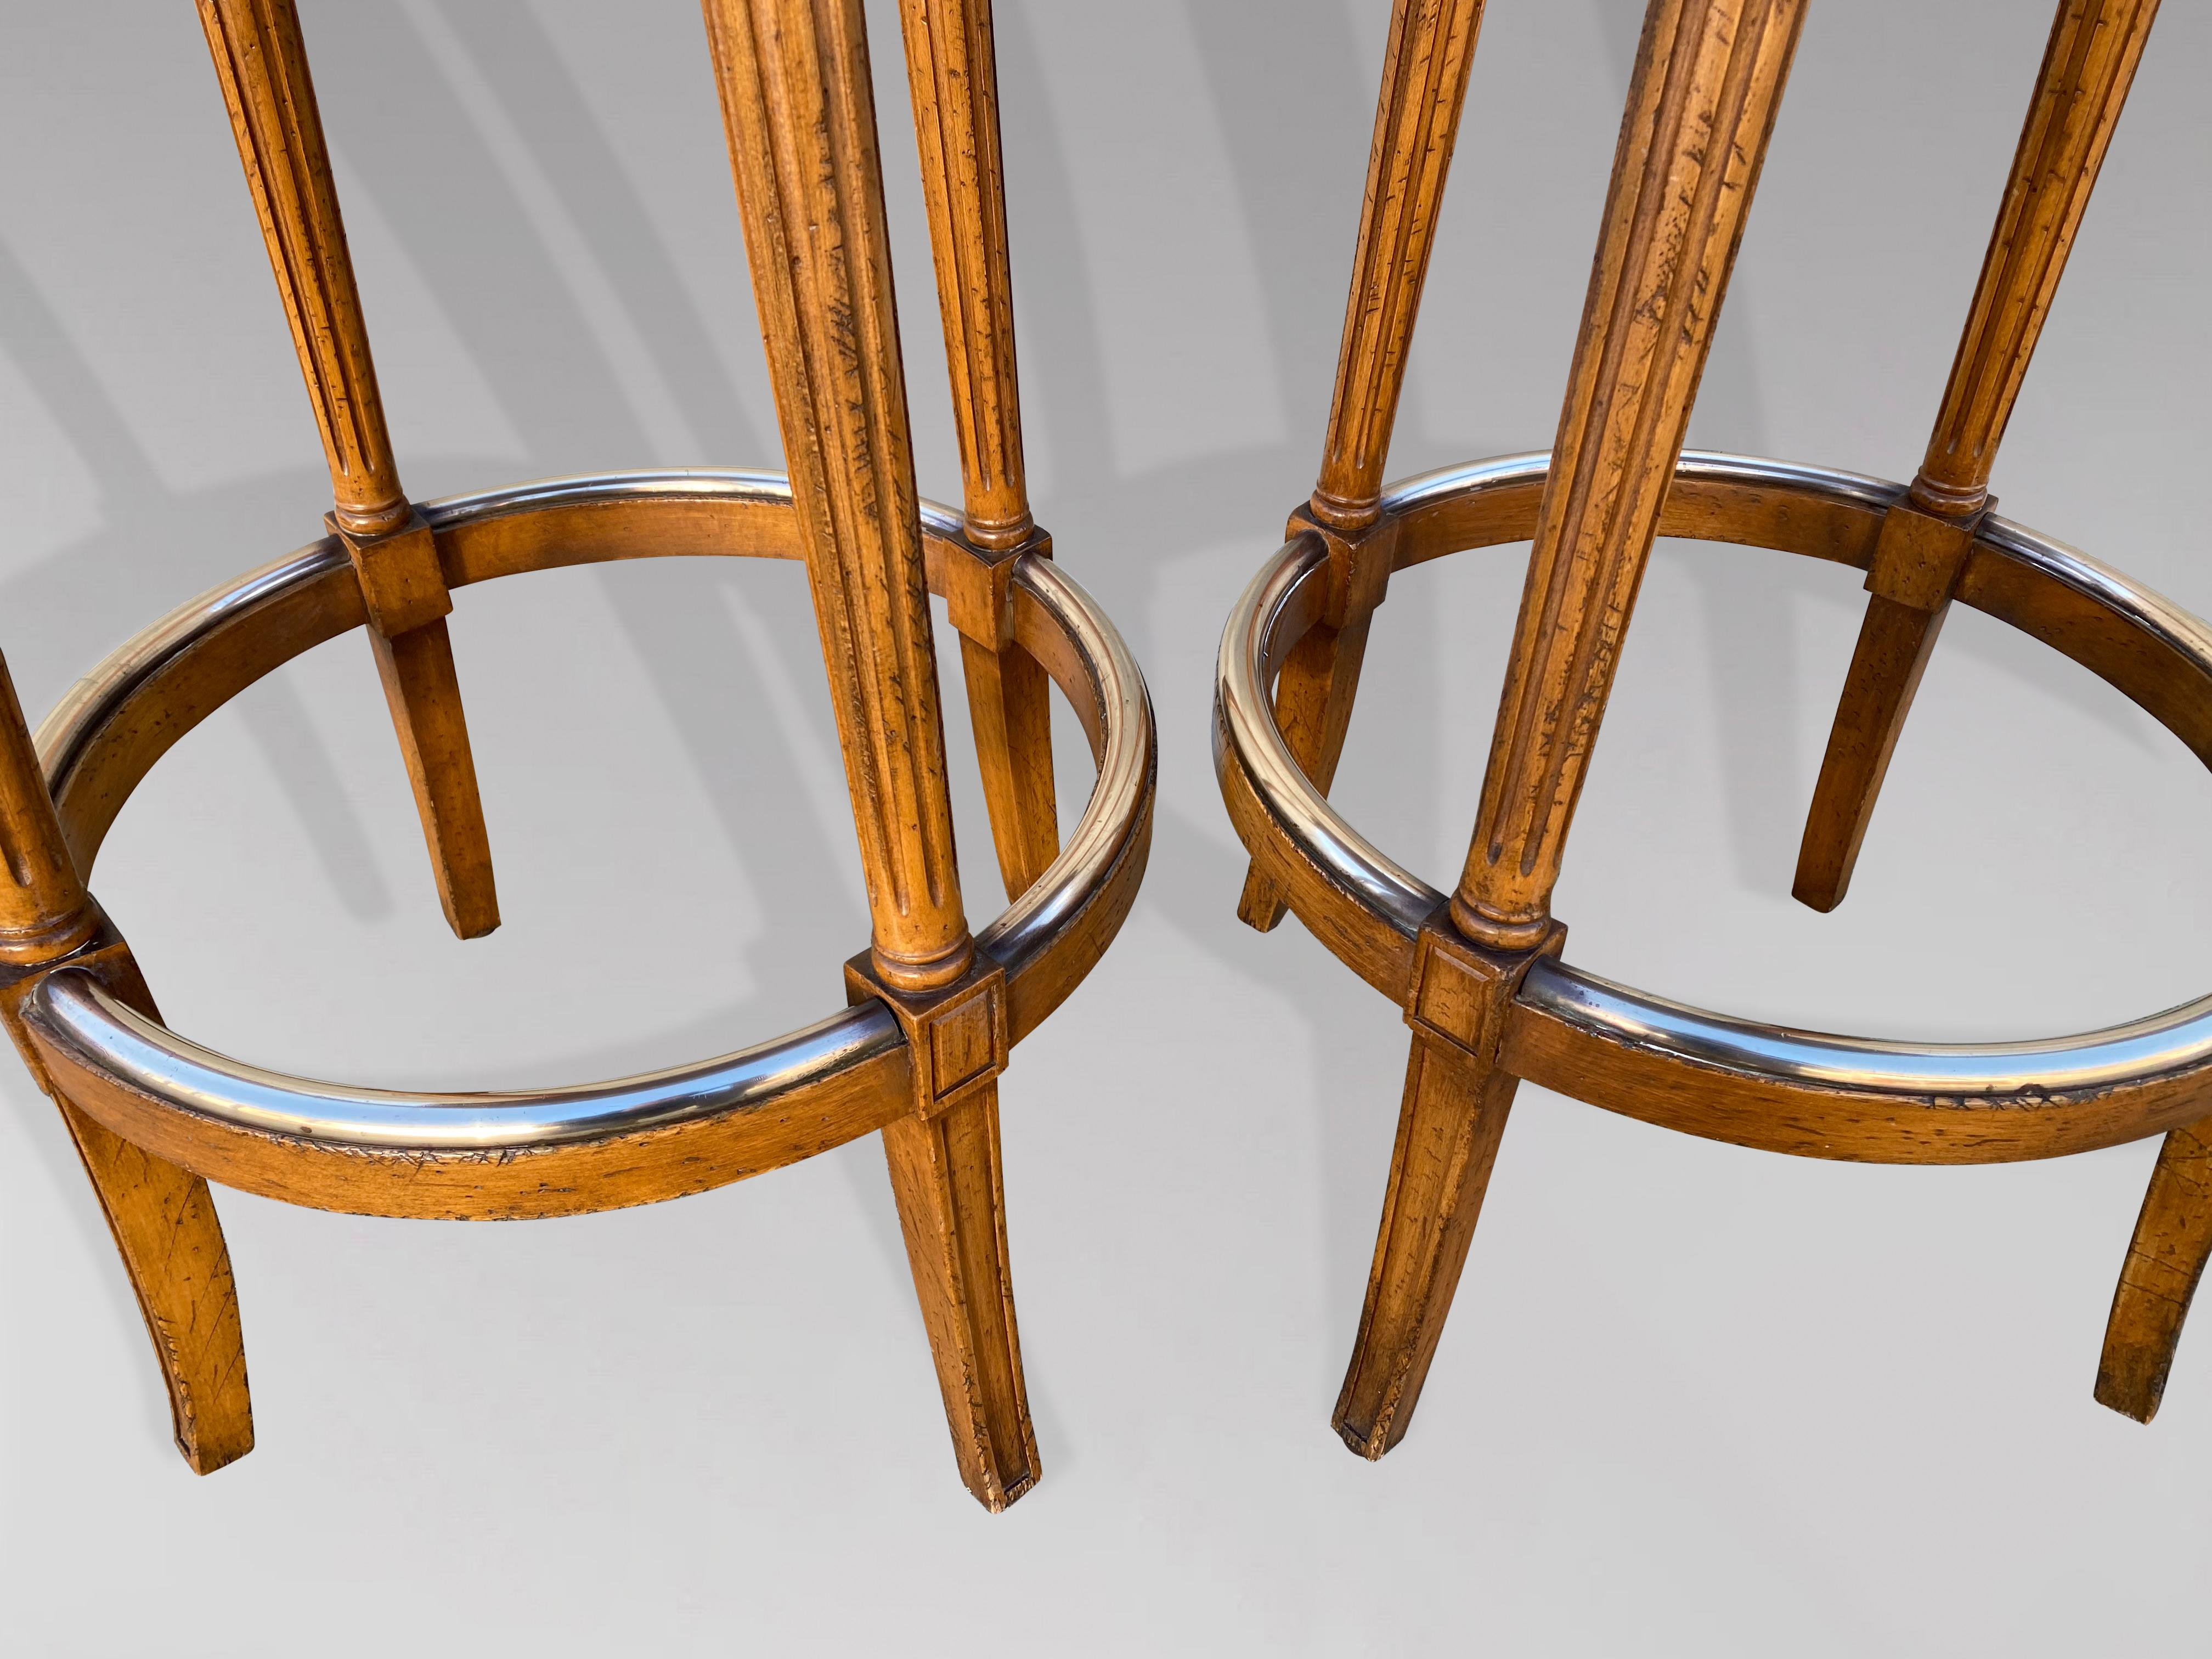 Hand-Crafted Pair of Mid-20th Century French Walnut Bistro Bar Stools